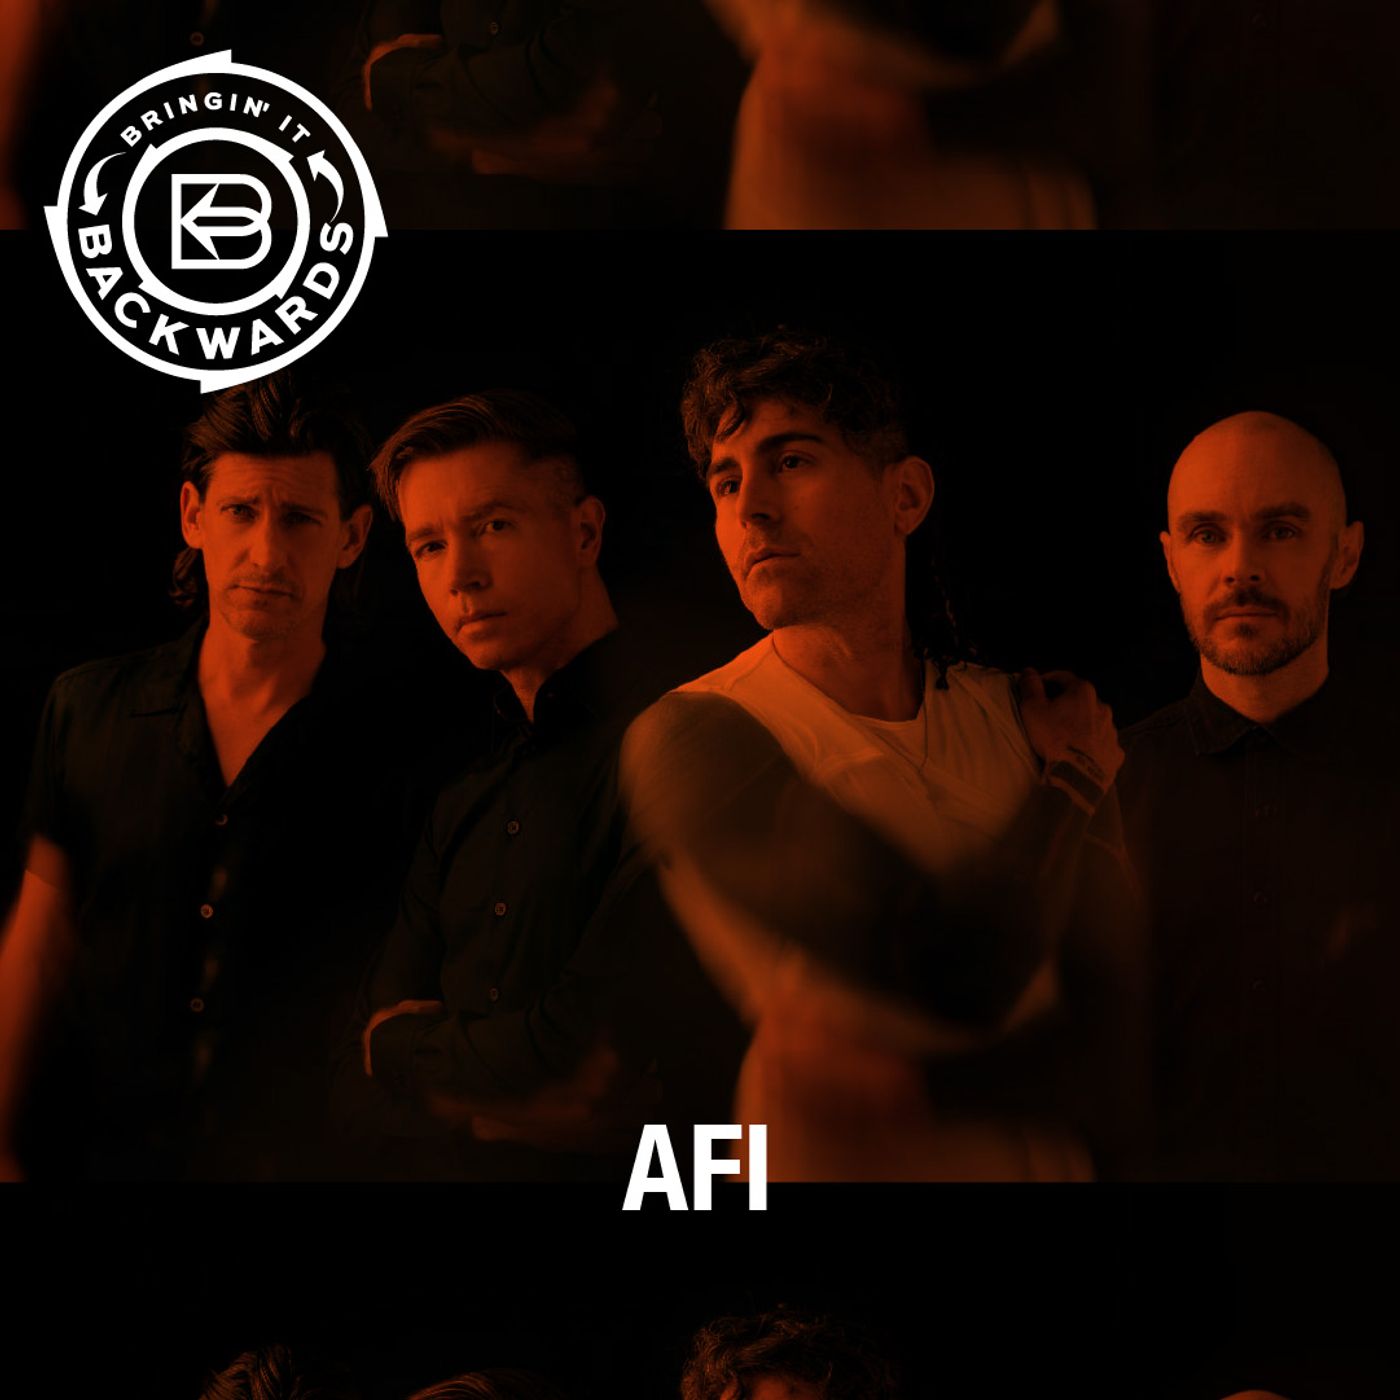 Interview with AFI Image